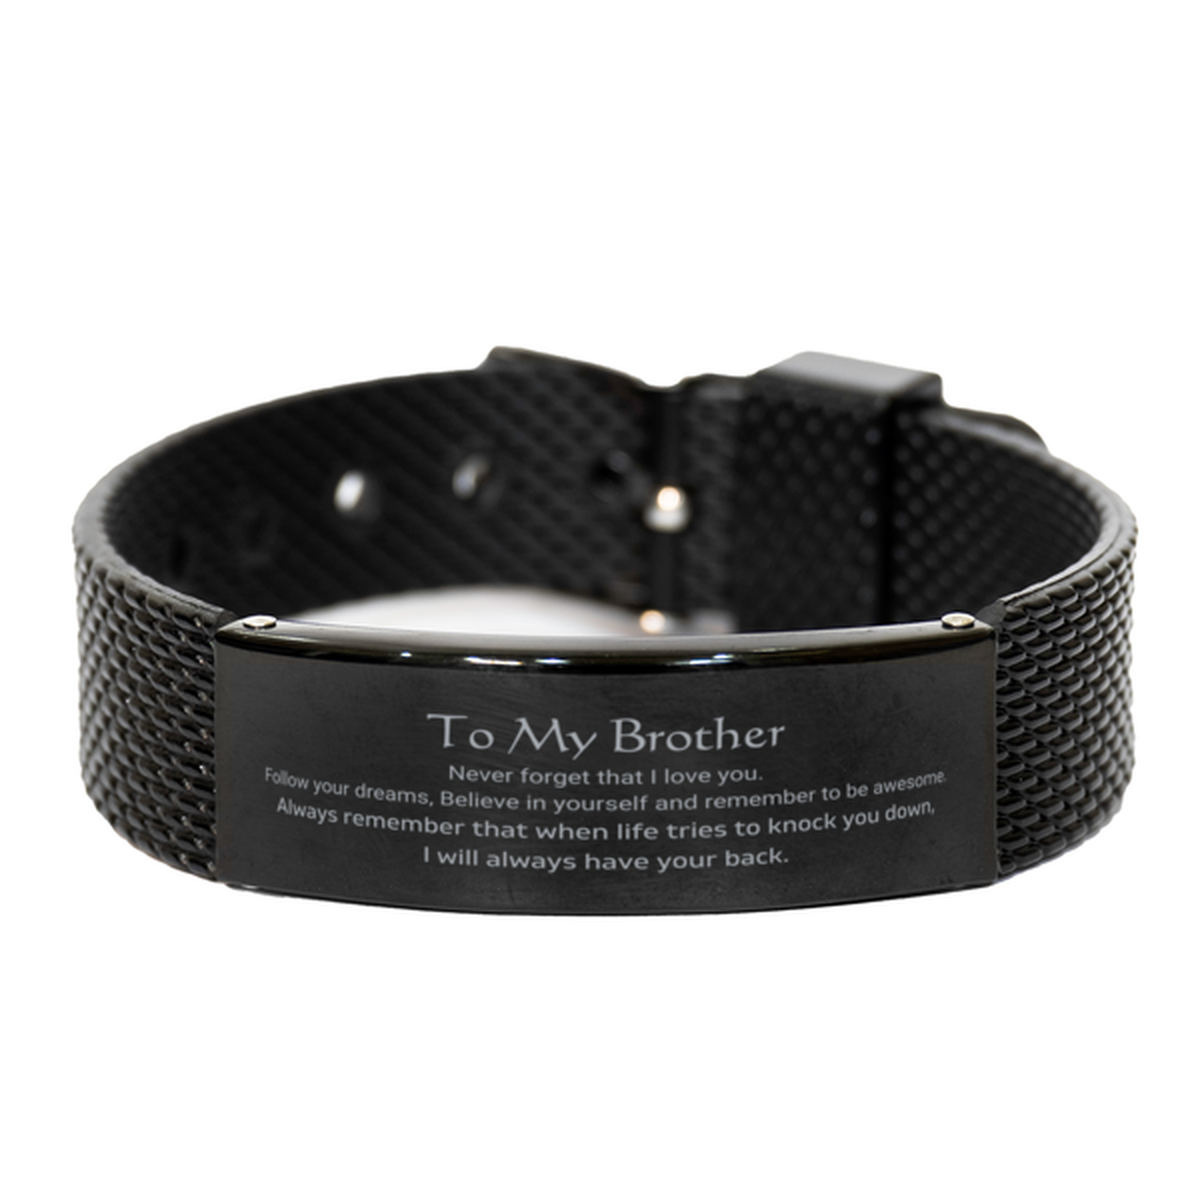 Inspirational Gifts for Brother, Follow your dreams, Believe in yourself, Brother Black Shark Mesh Bracelet, Birthday Christmas Unique Gifts For Brother